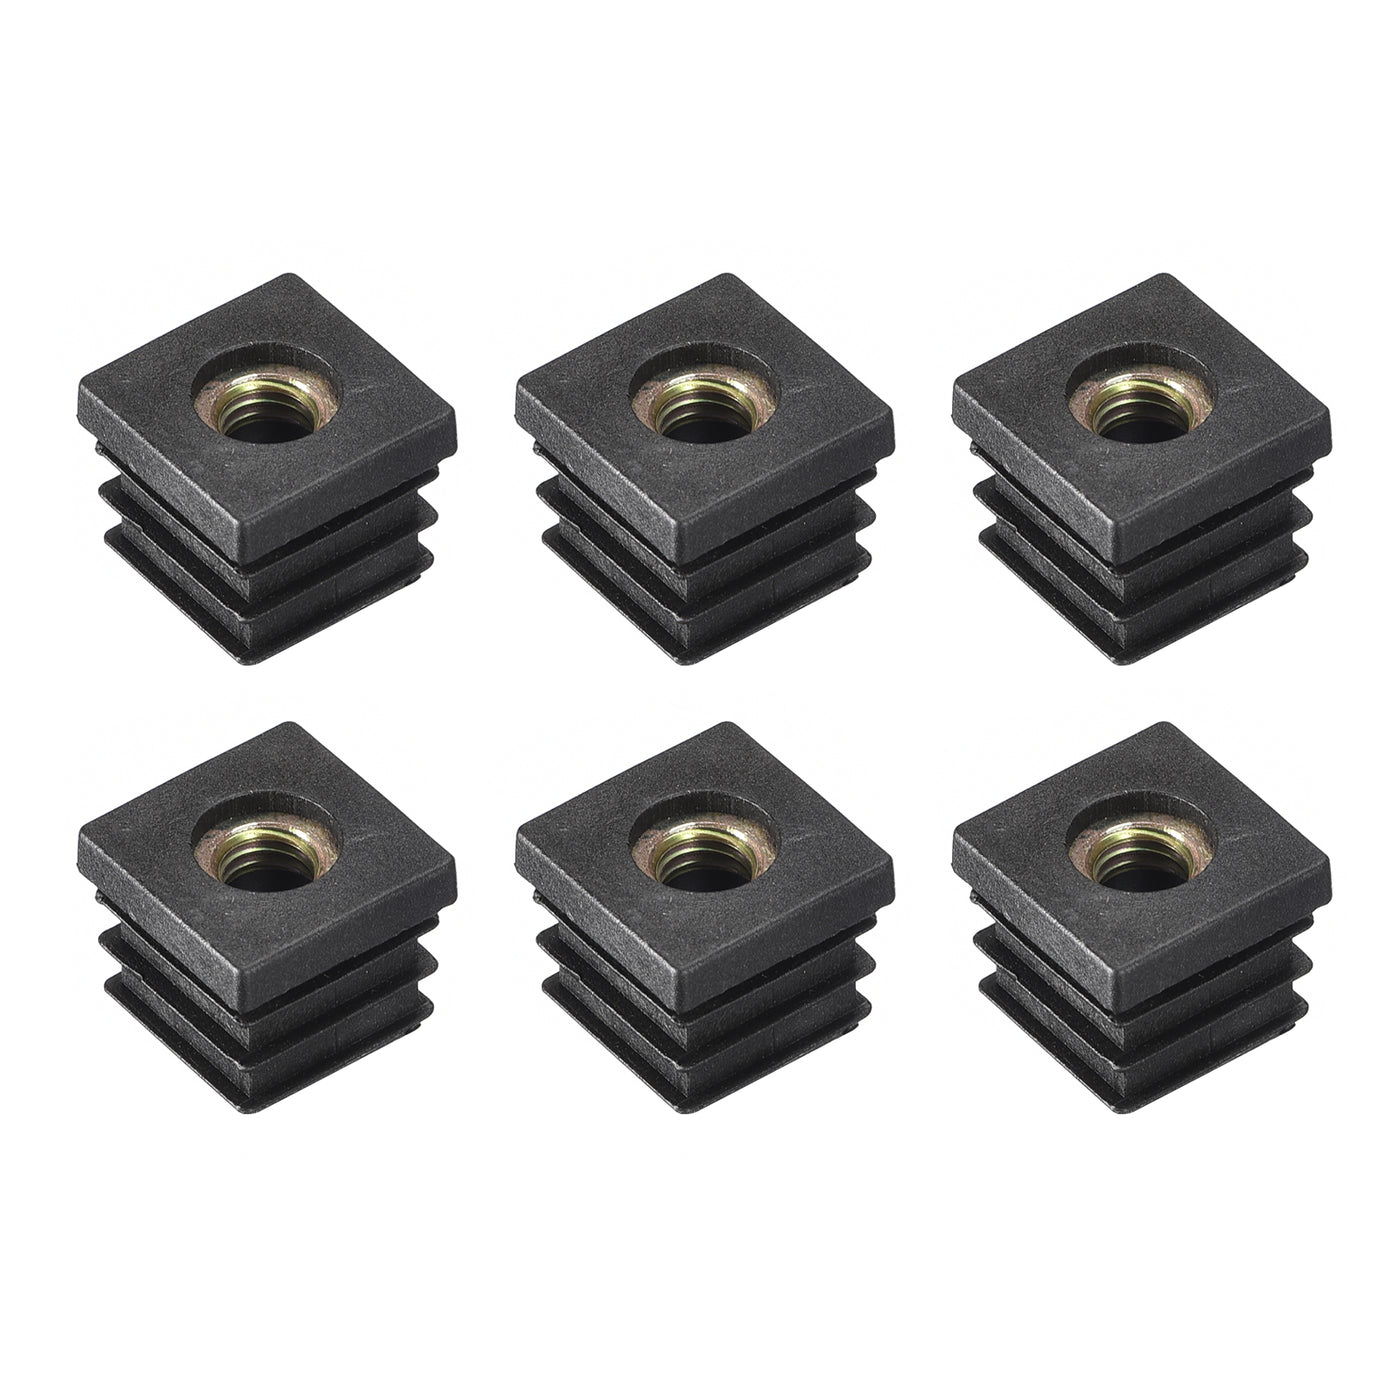 uxcell Uxcell 6Pcs 0.79"x0.79" Caster Insert with Thread, Square M8 Thread for Furniture